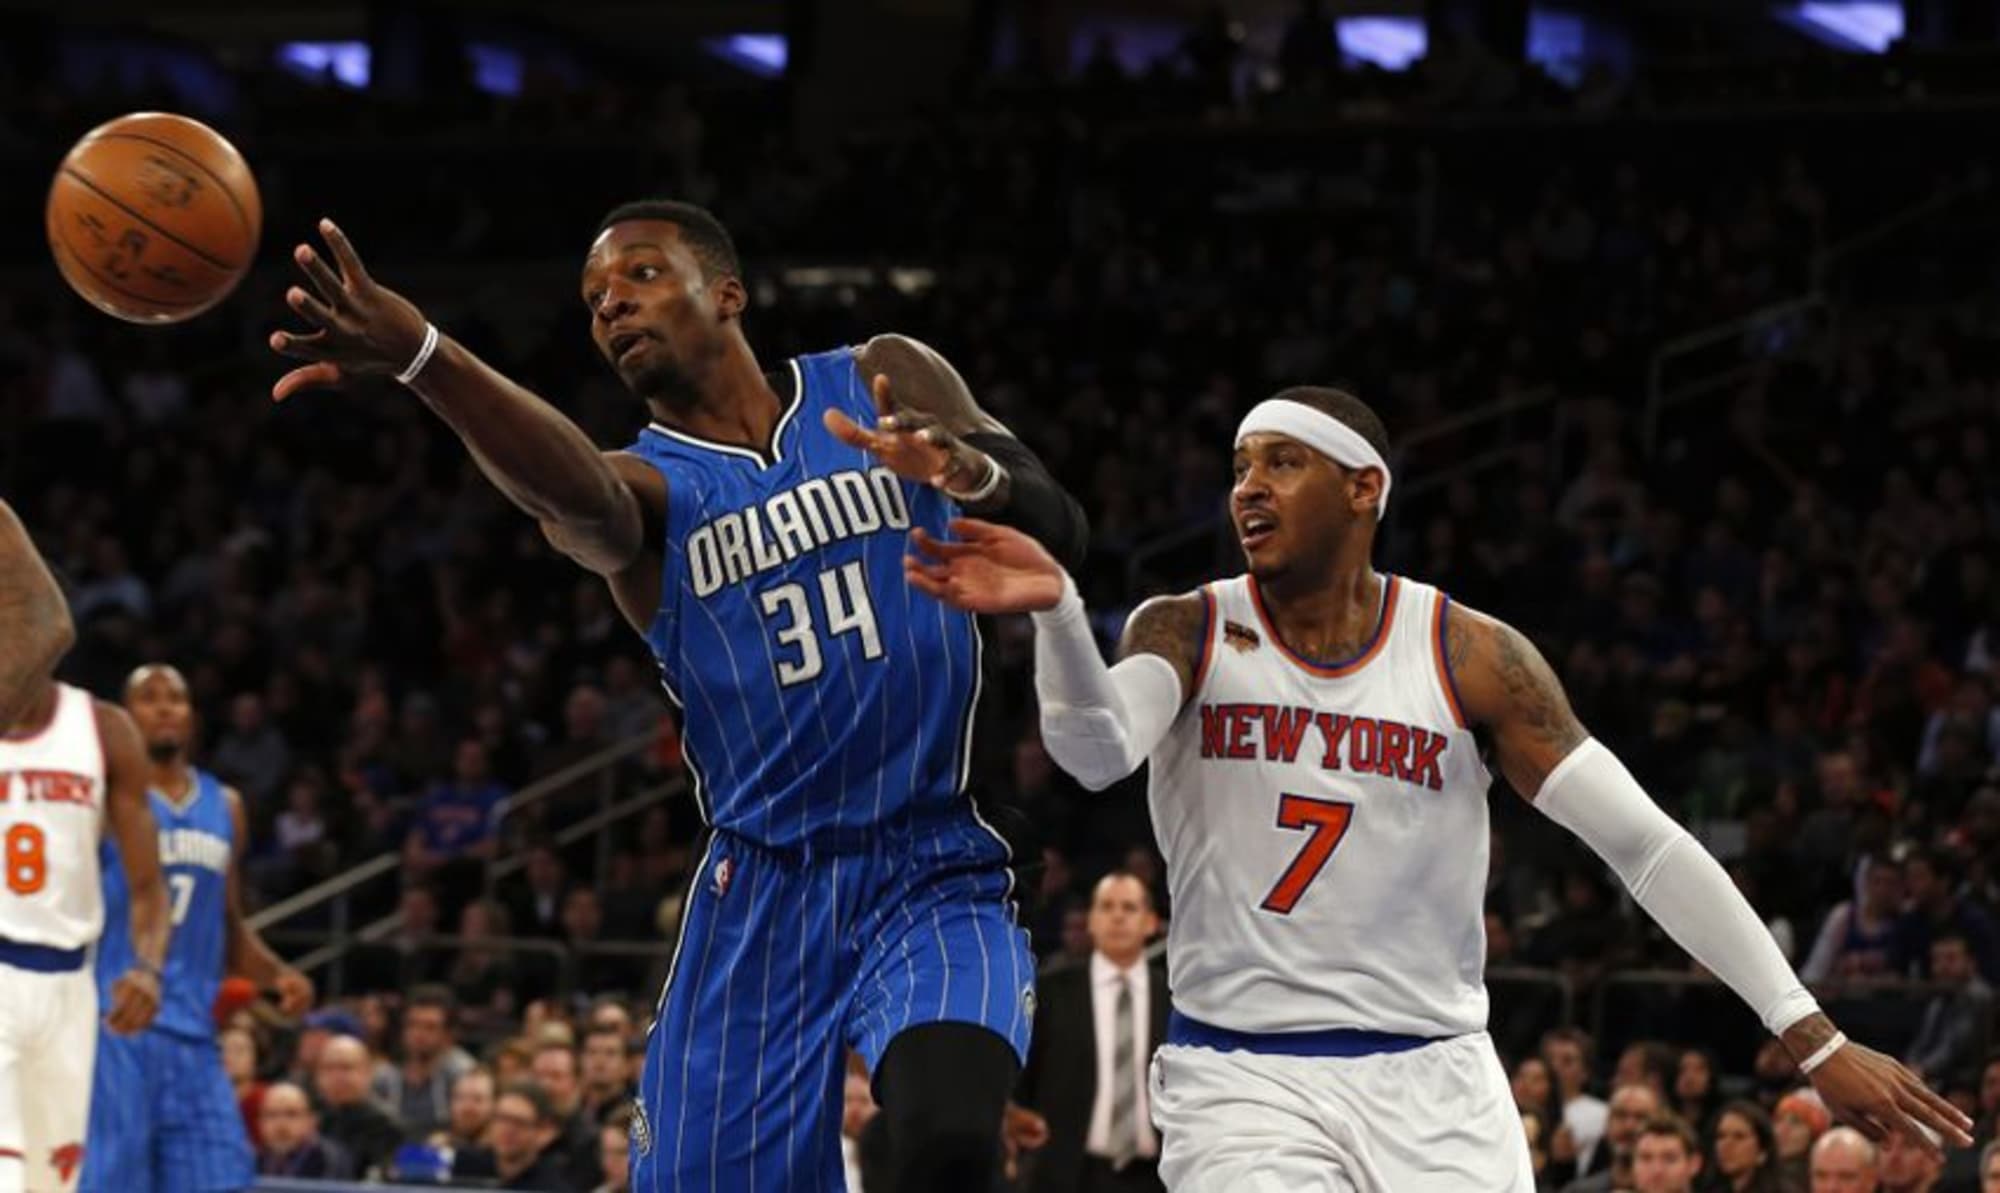 Carmelo Anthony: 'No pressure' in playoffs with Knicks